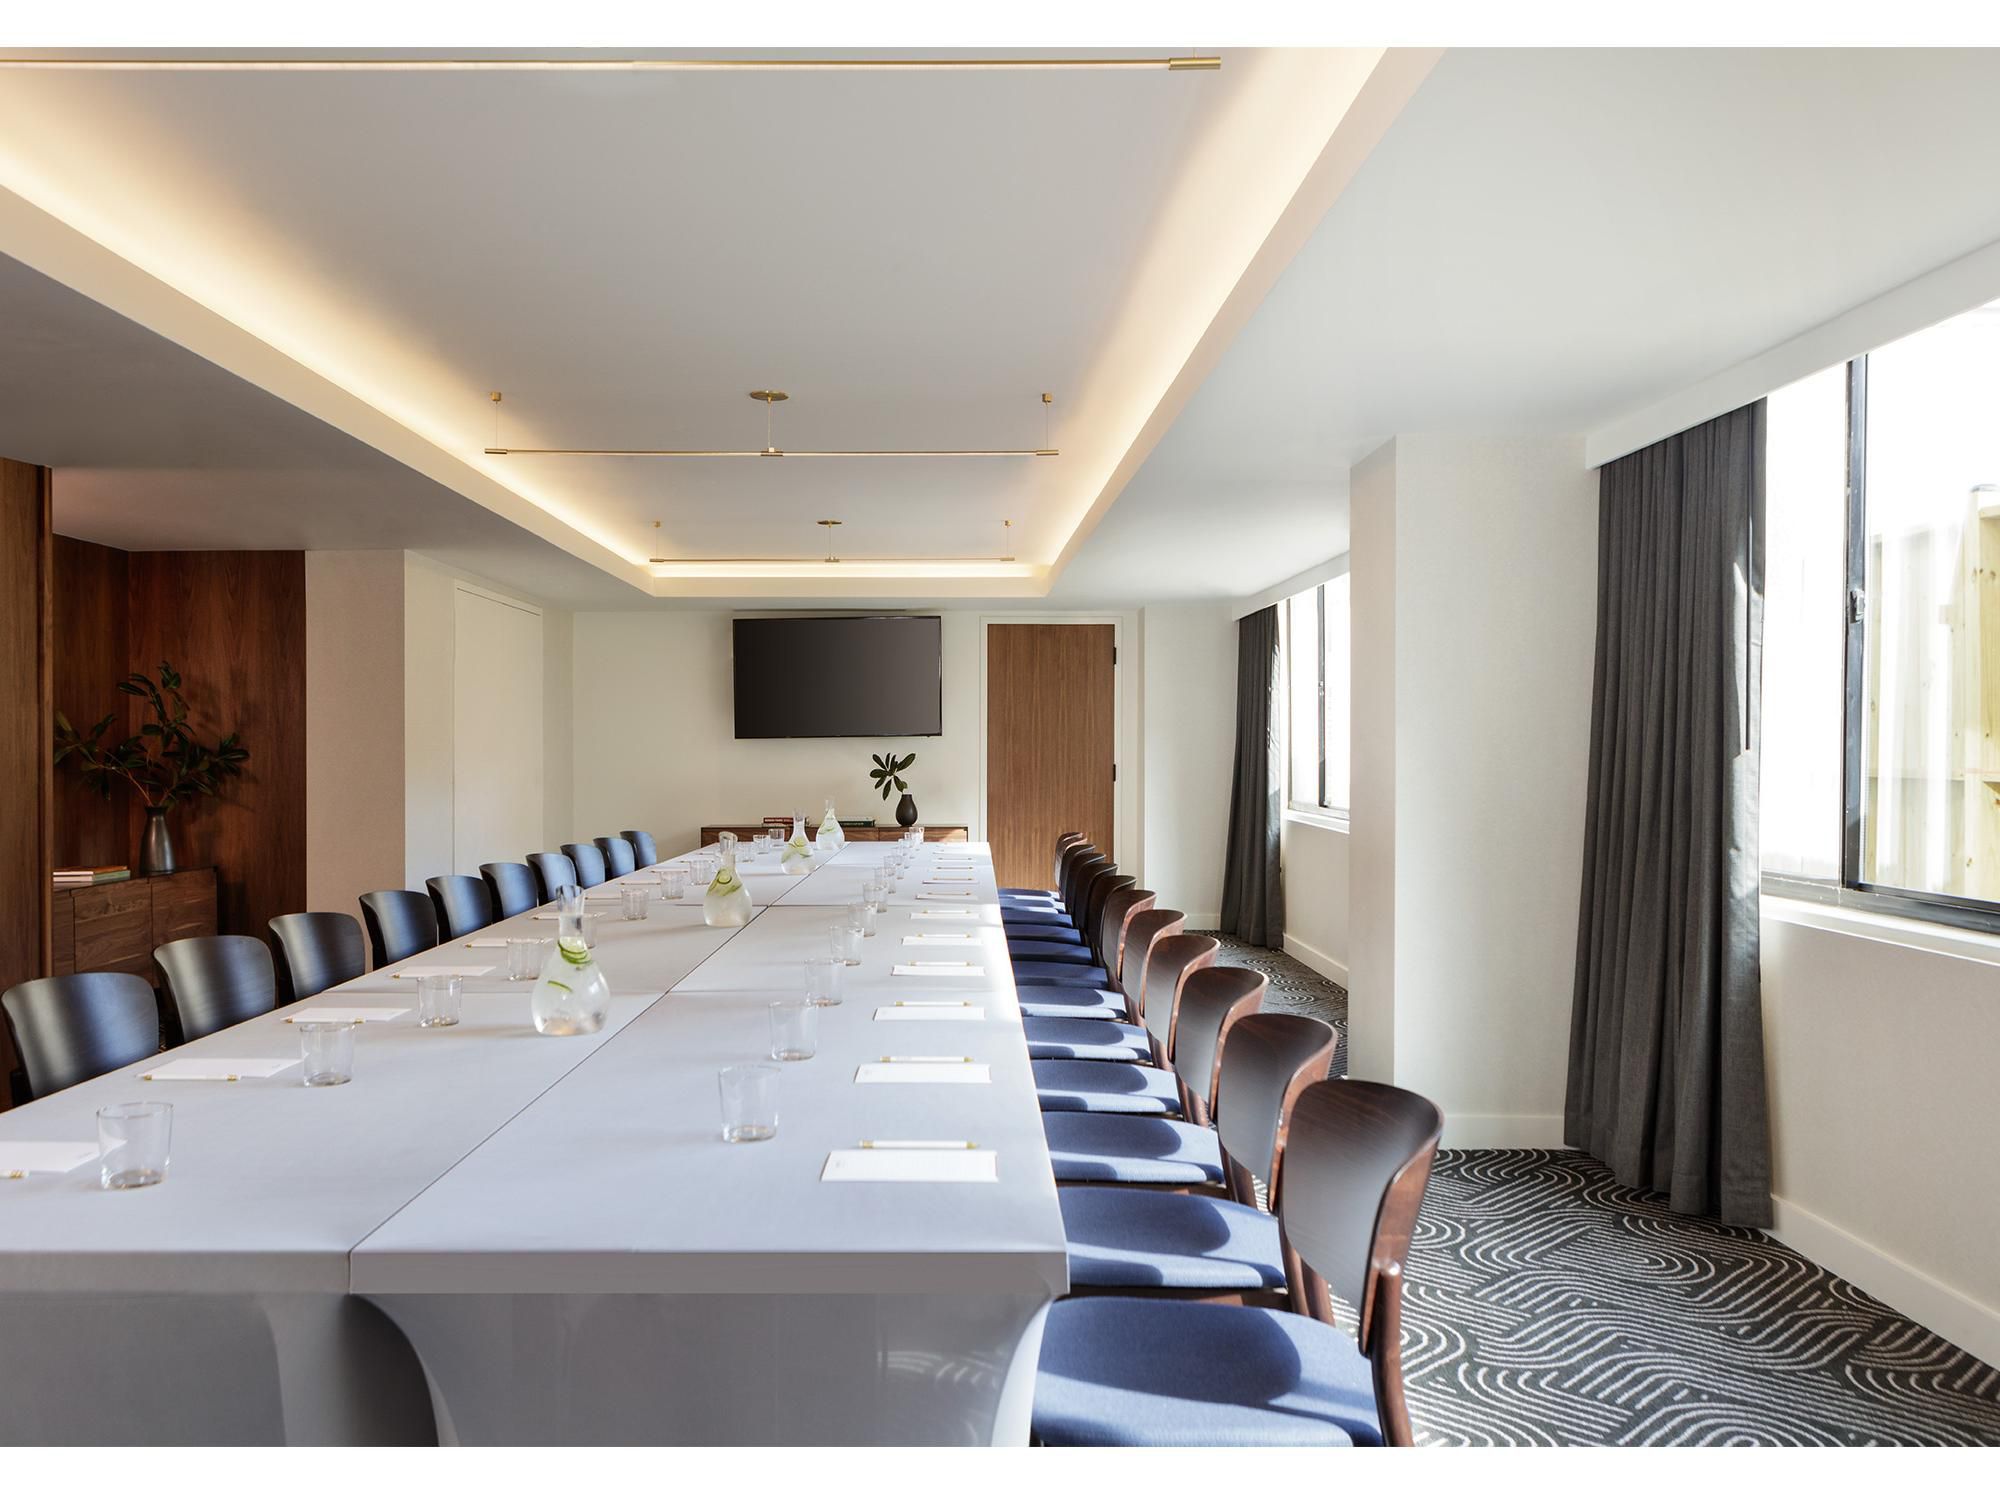 An upscale hotel meeting room with tables around the edges